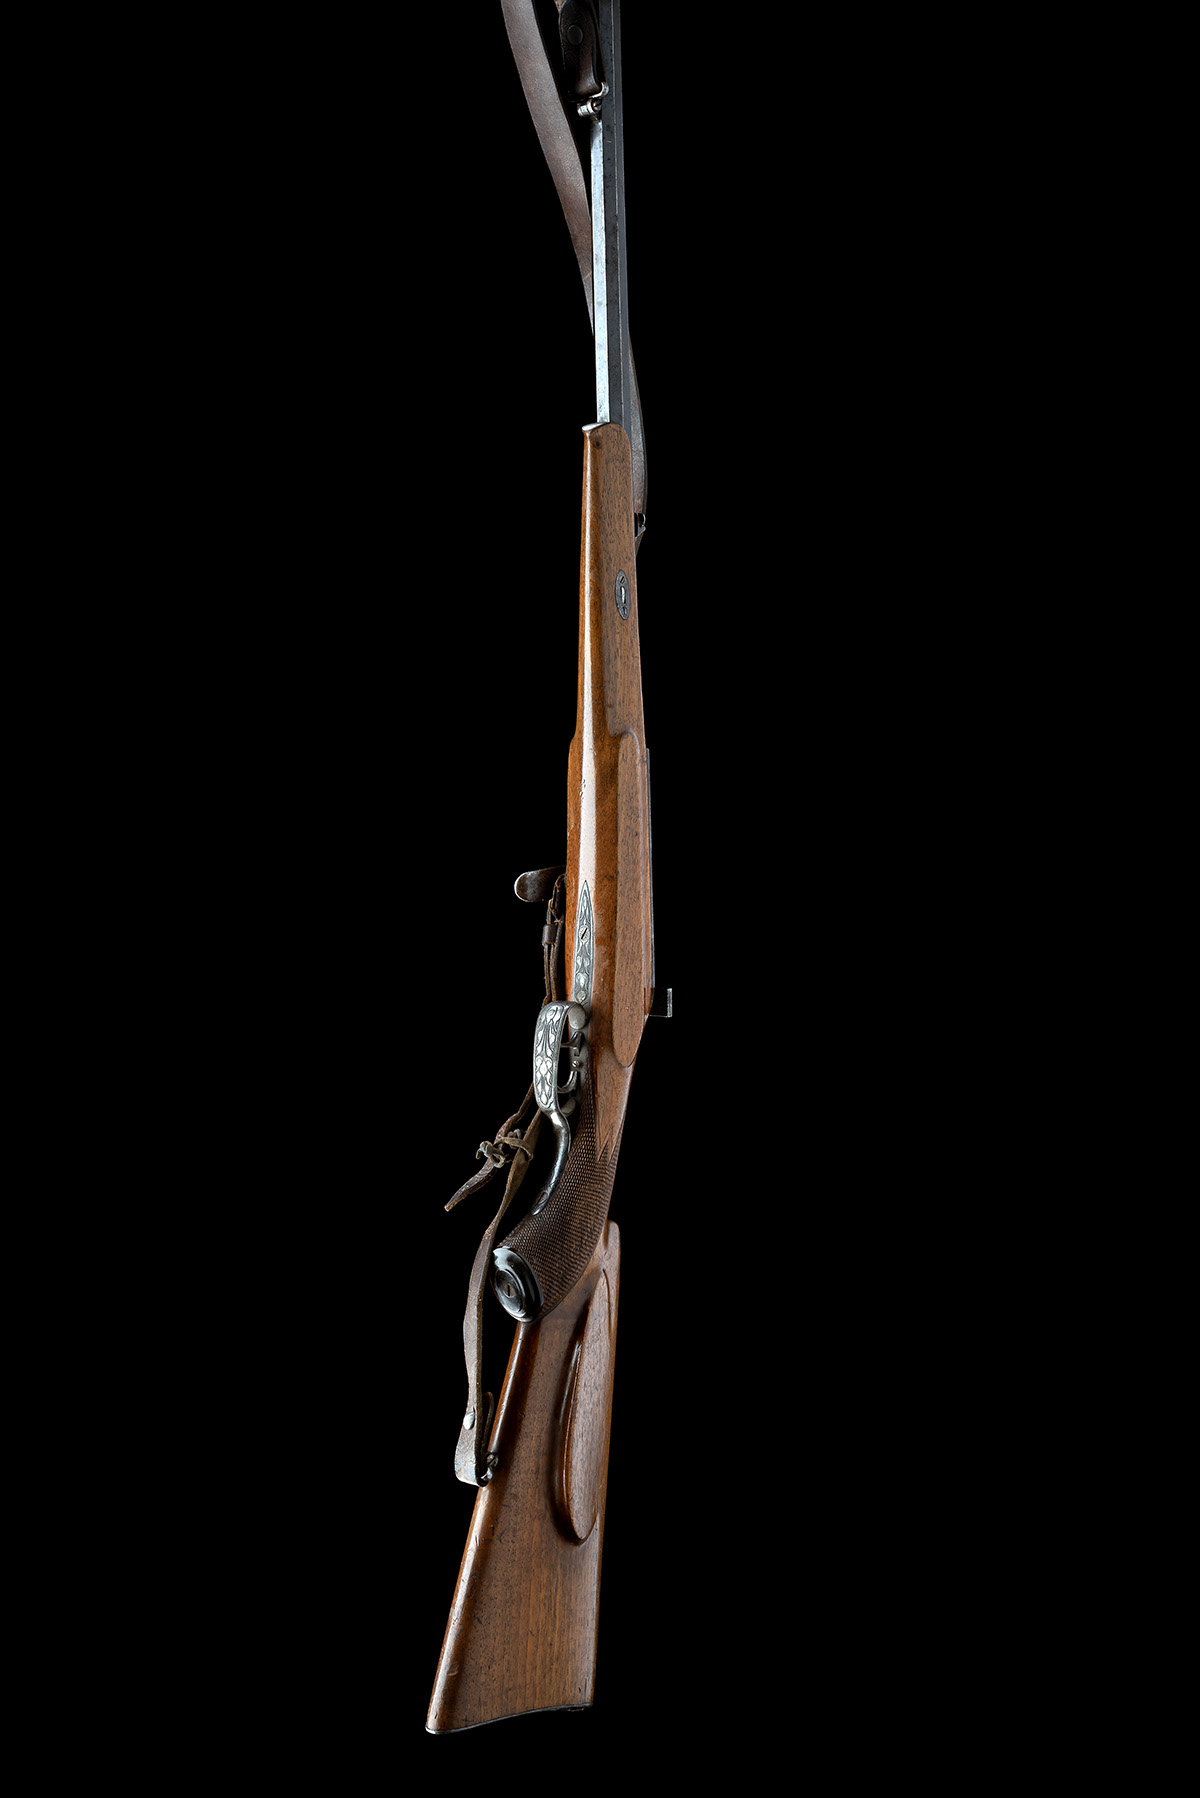 A CONTINENTAL 8.15x46R SINGLE-SHOT BOLT-ACTION SPORTING RIFLE, UNSIGNED, serial no. 3780, of - Image 8 of 8